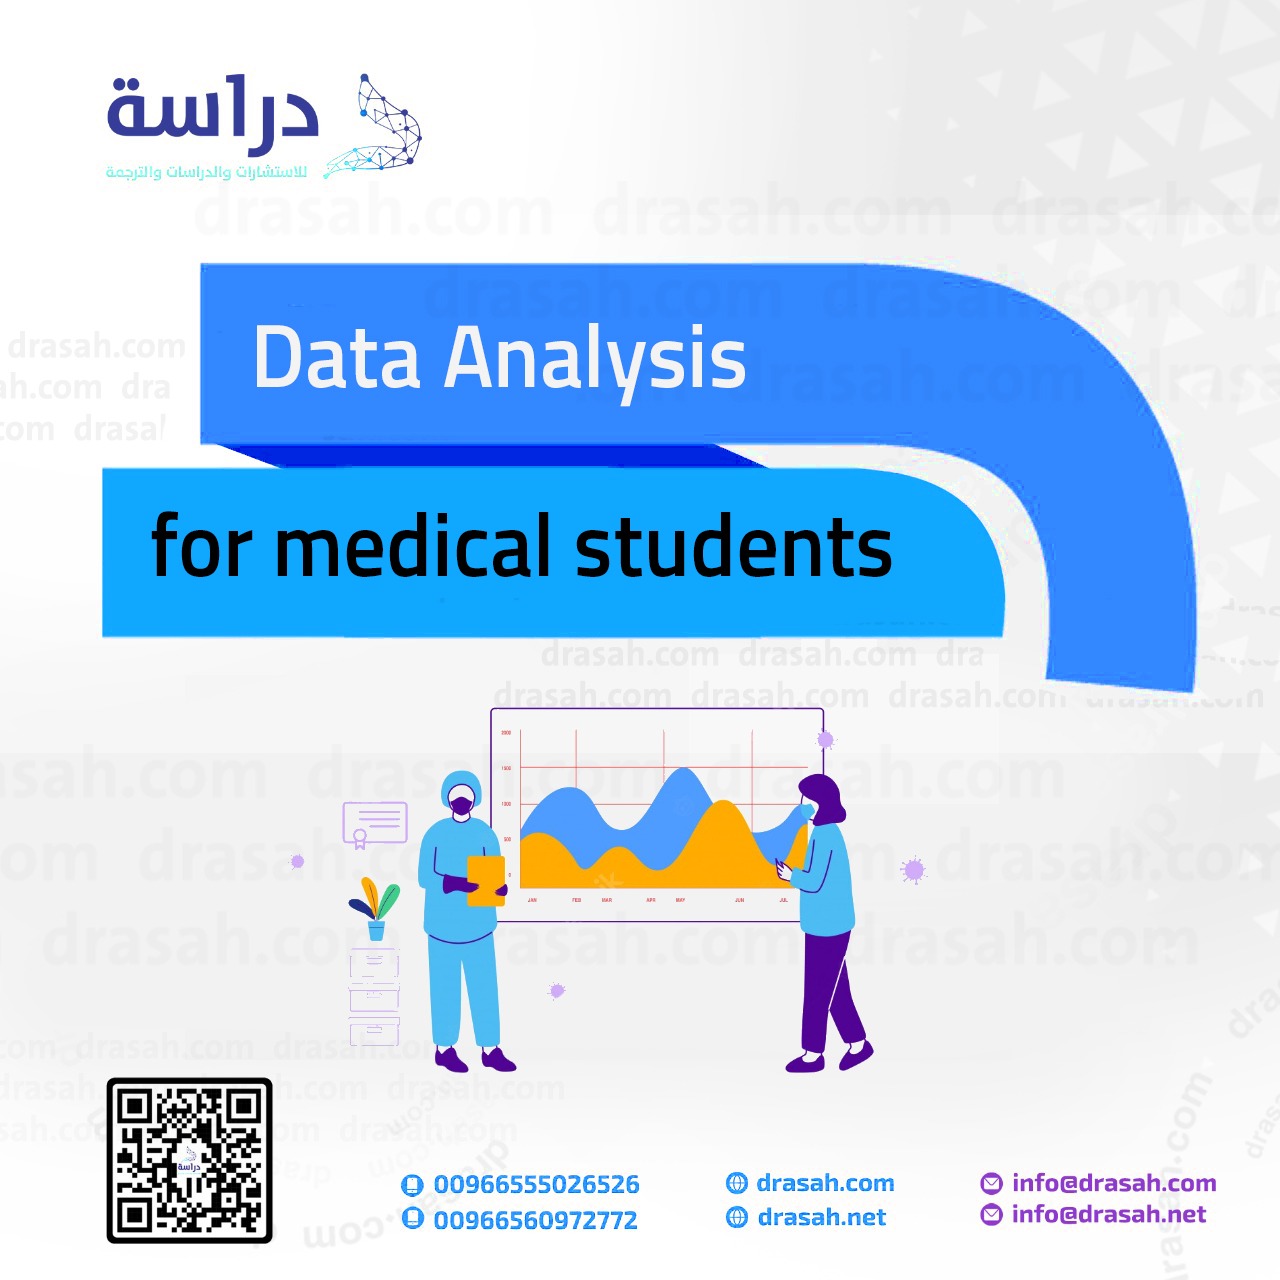 Data Analysis for medical students